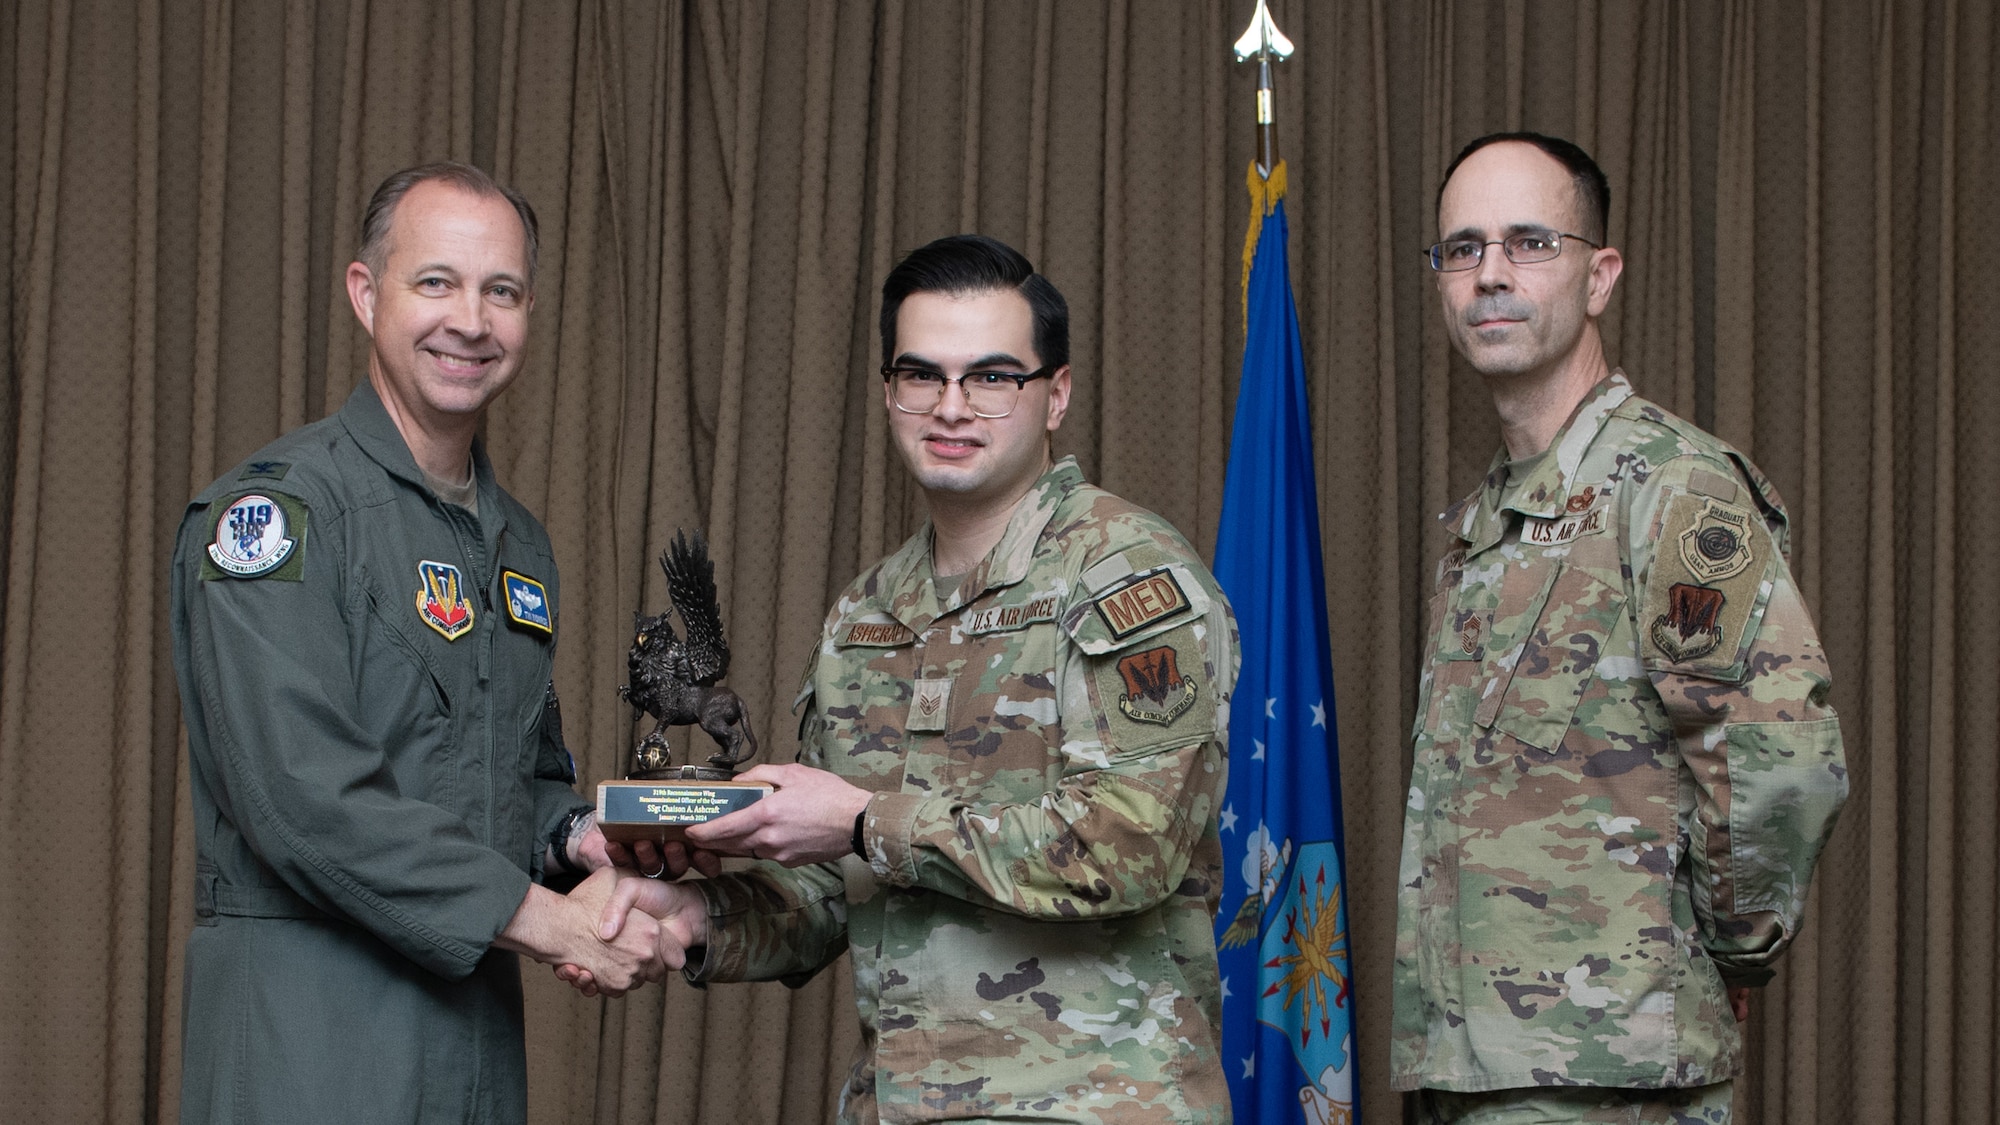 Three men in military uniforms stand on stage exchanging an award.